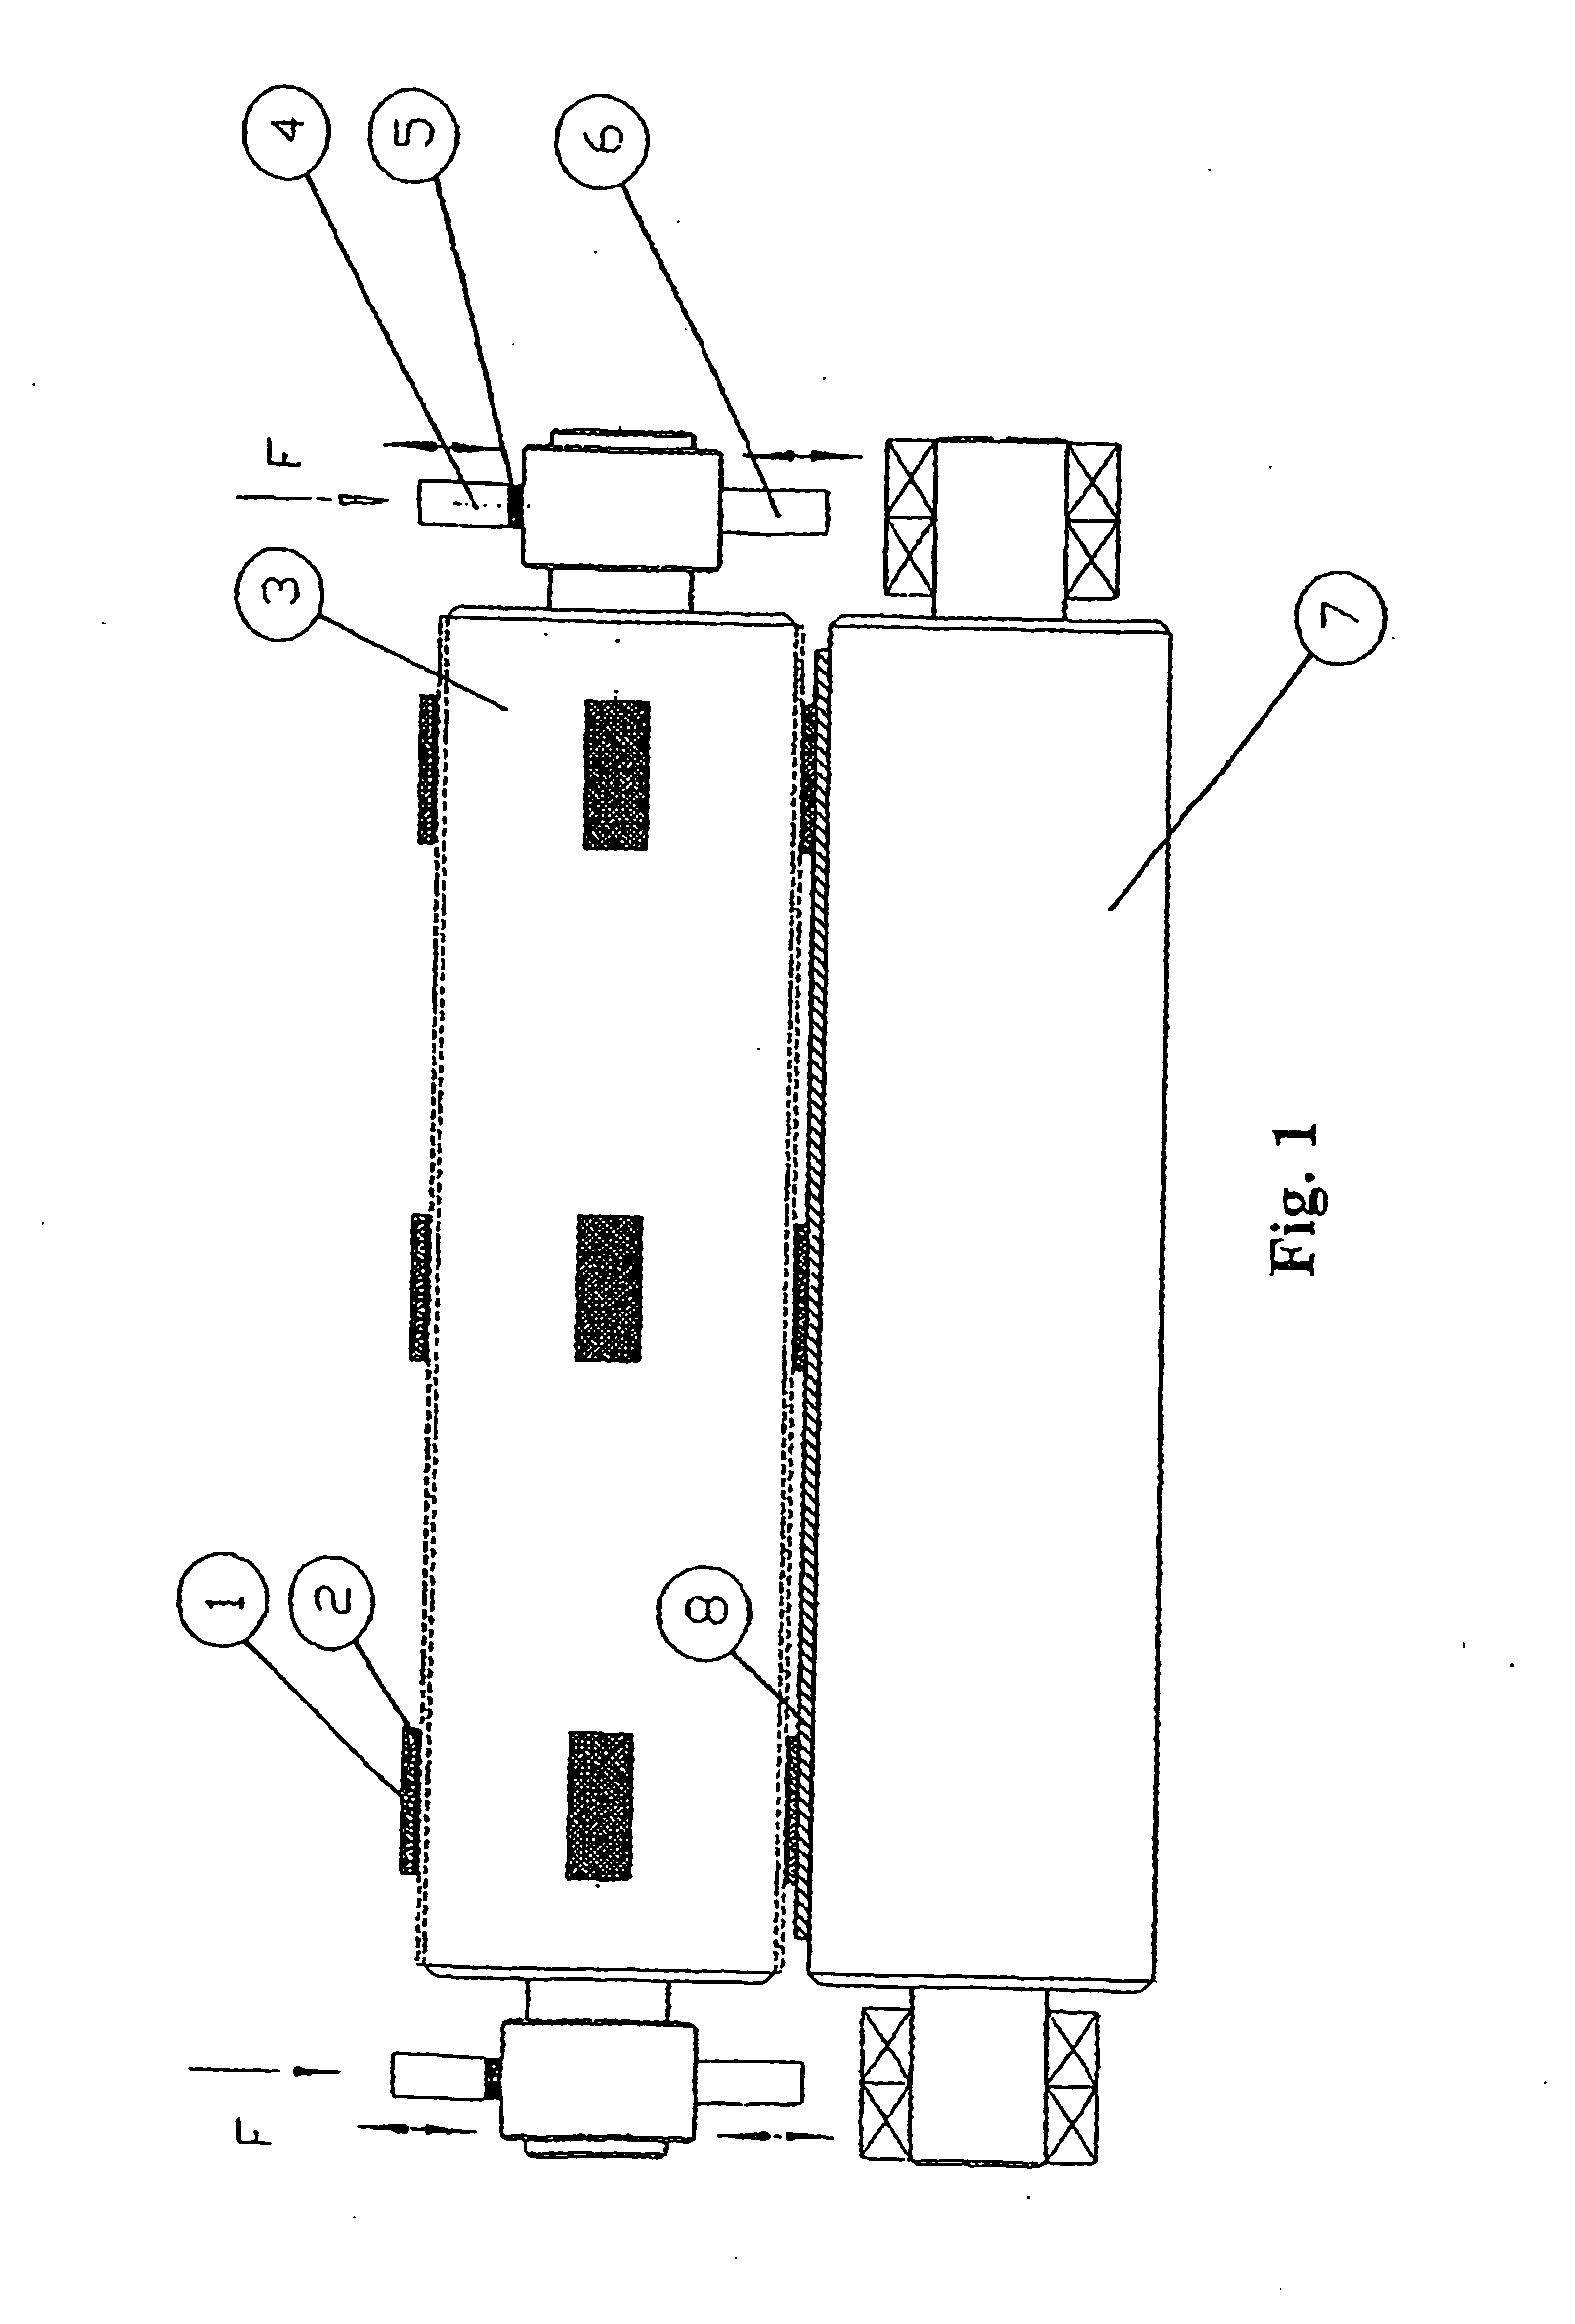 Device for processing a three dimensional structure into a substrate